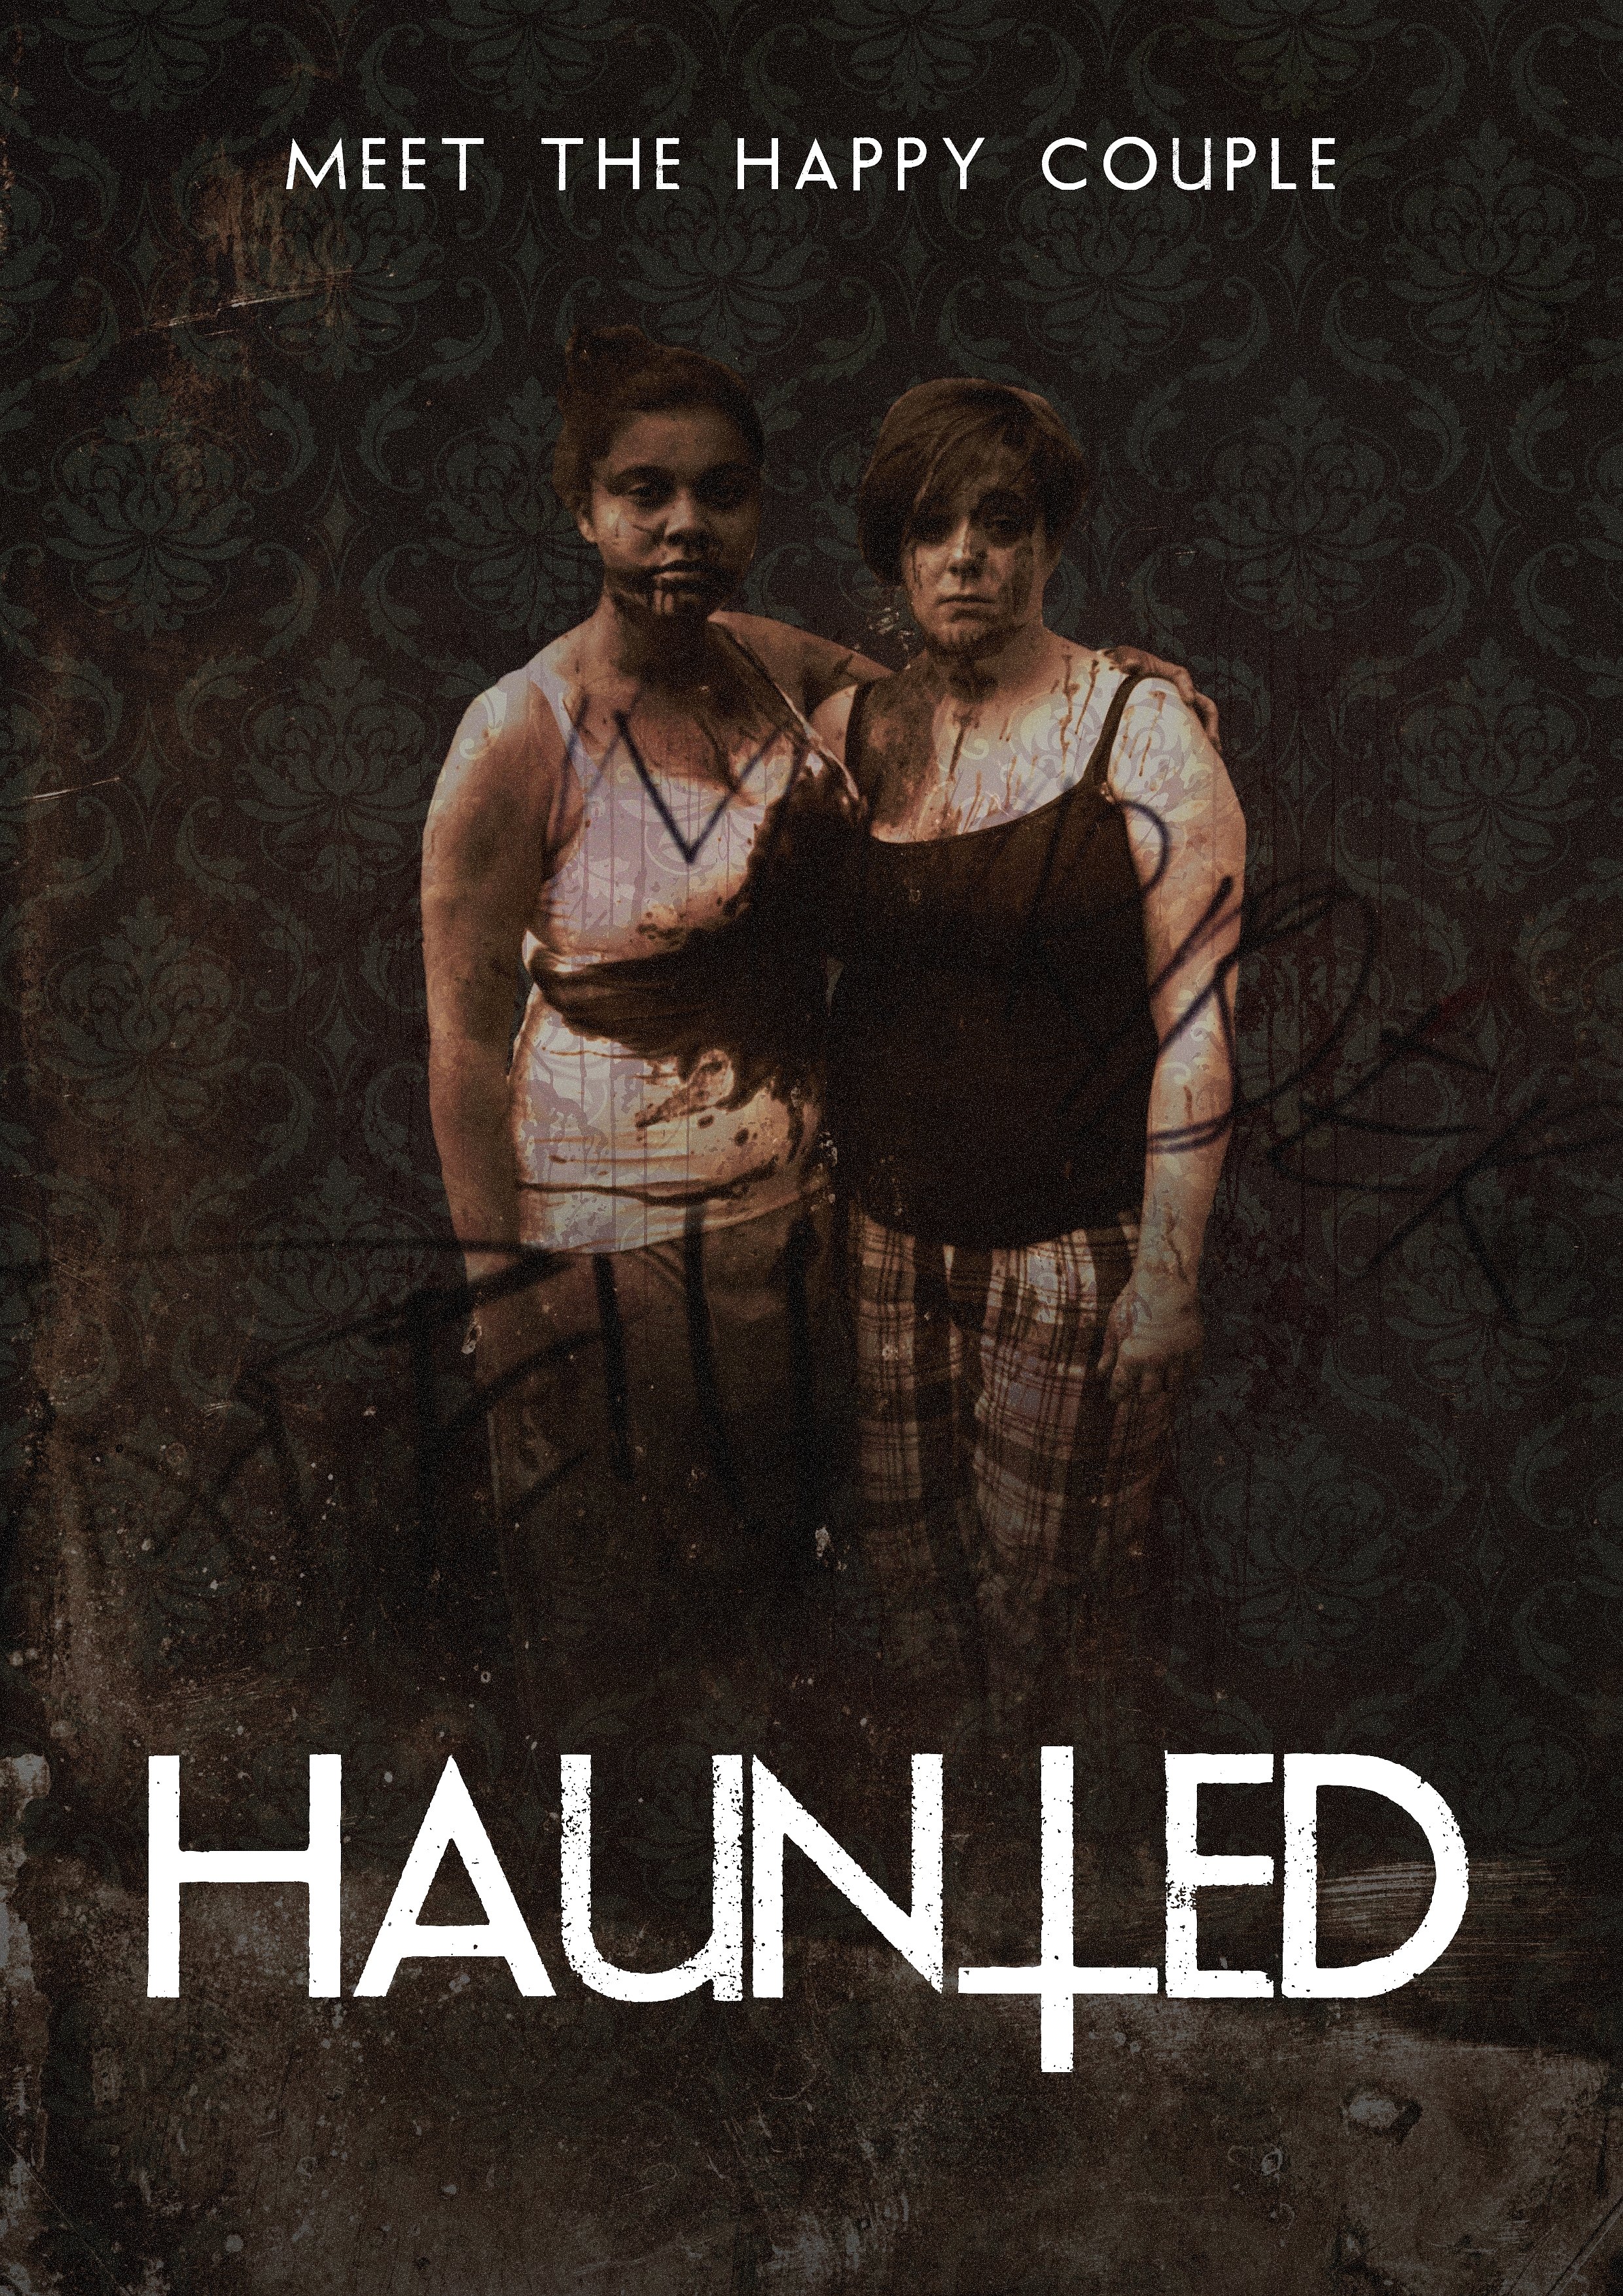 Haunted Character Poster - The Happy Couple.jpg